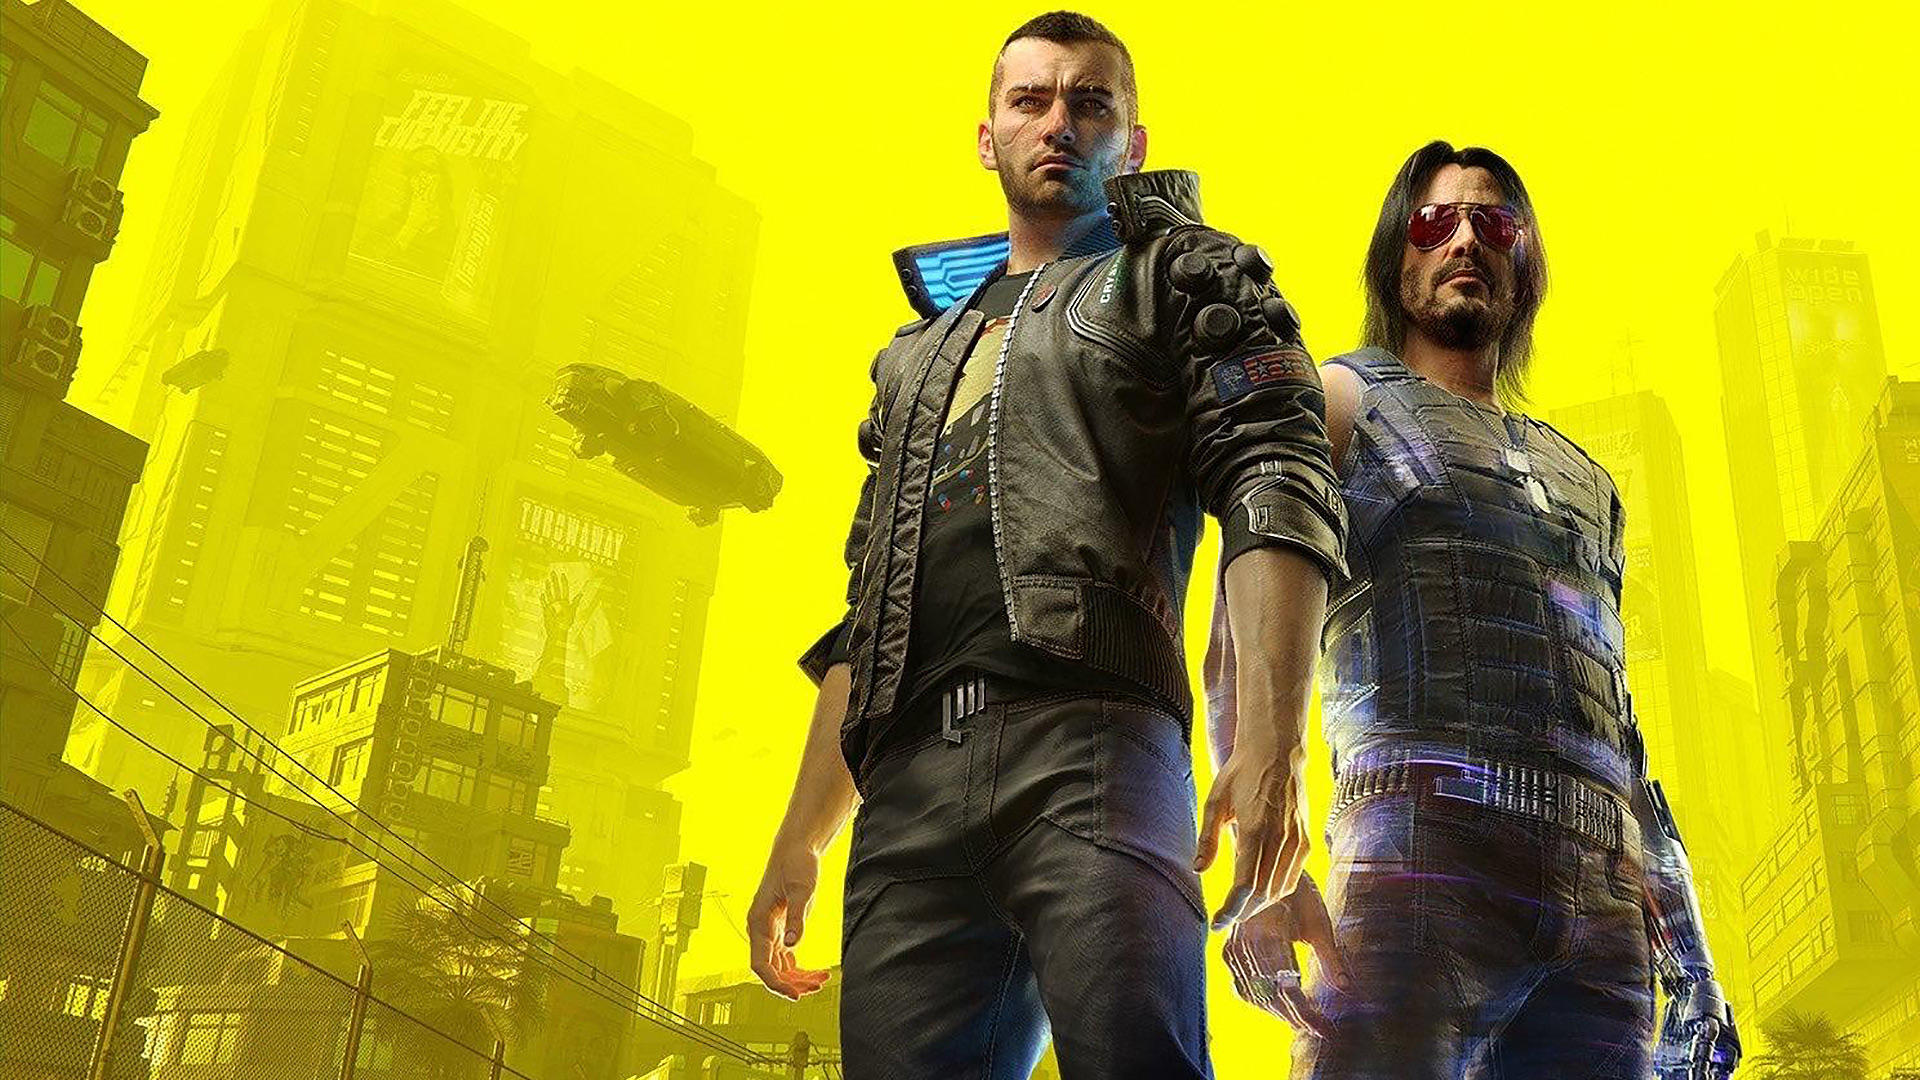 CD Projekt Red Says Cyberpunk 2077’s Pre-Order Numbers Are ‘Visibly Higher’ Than Any Witcher Title